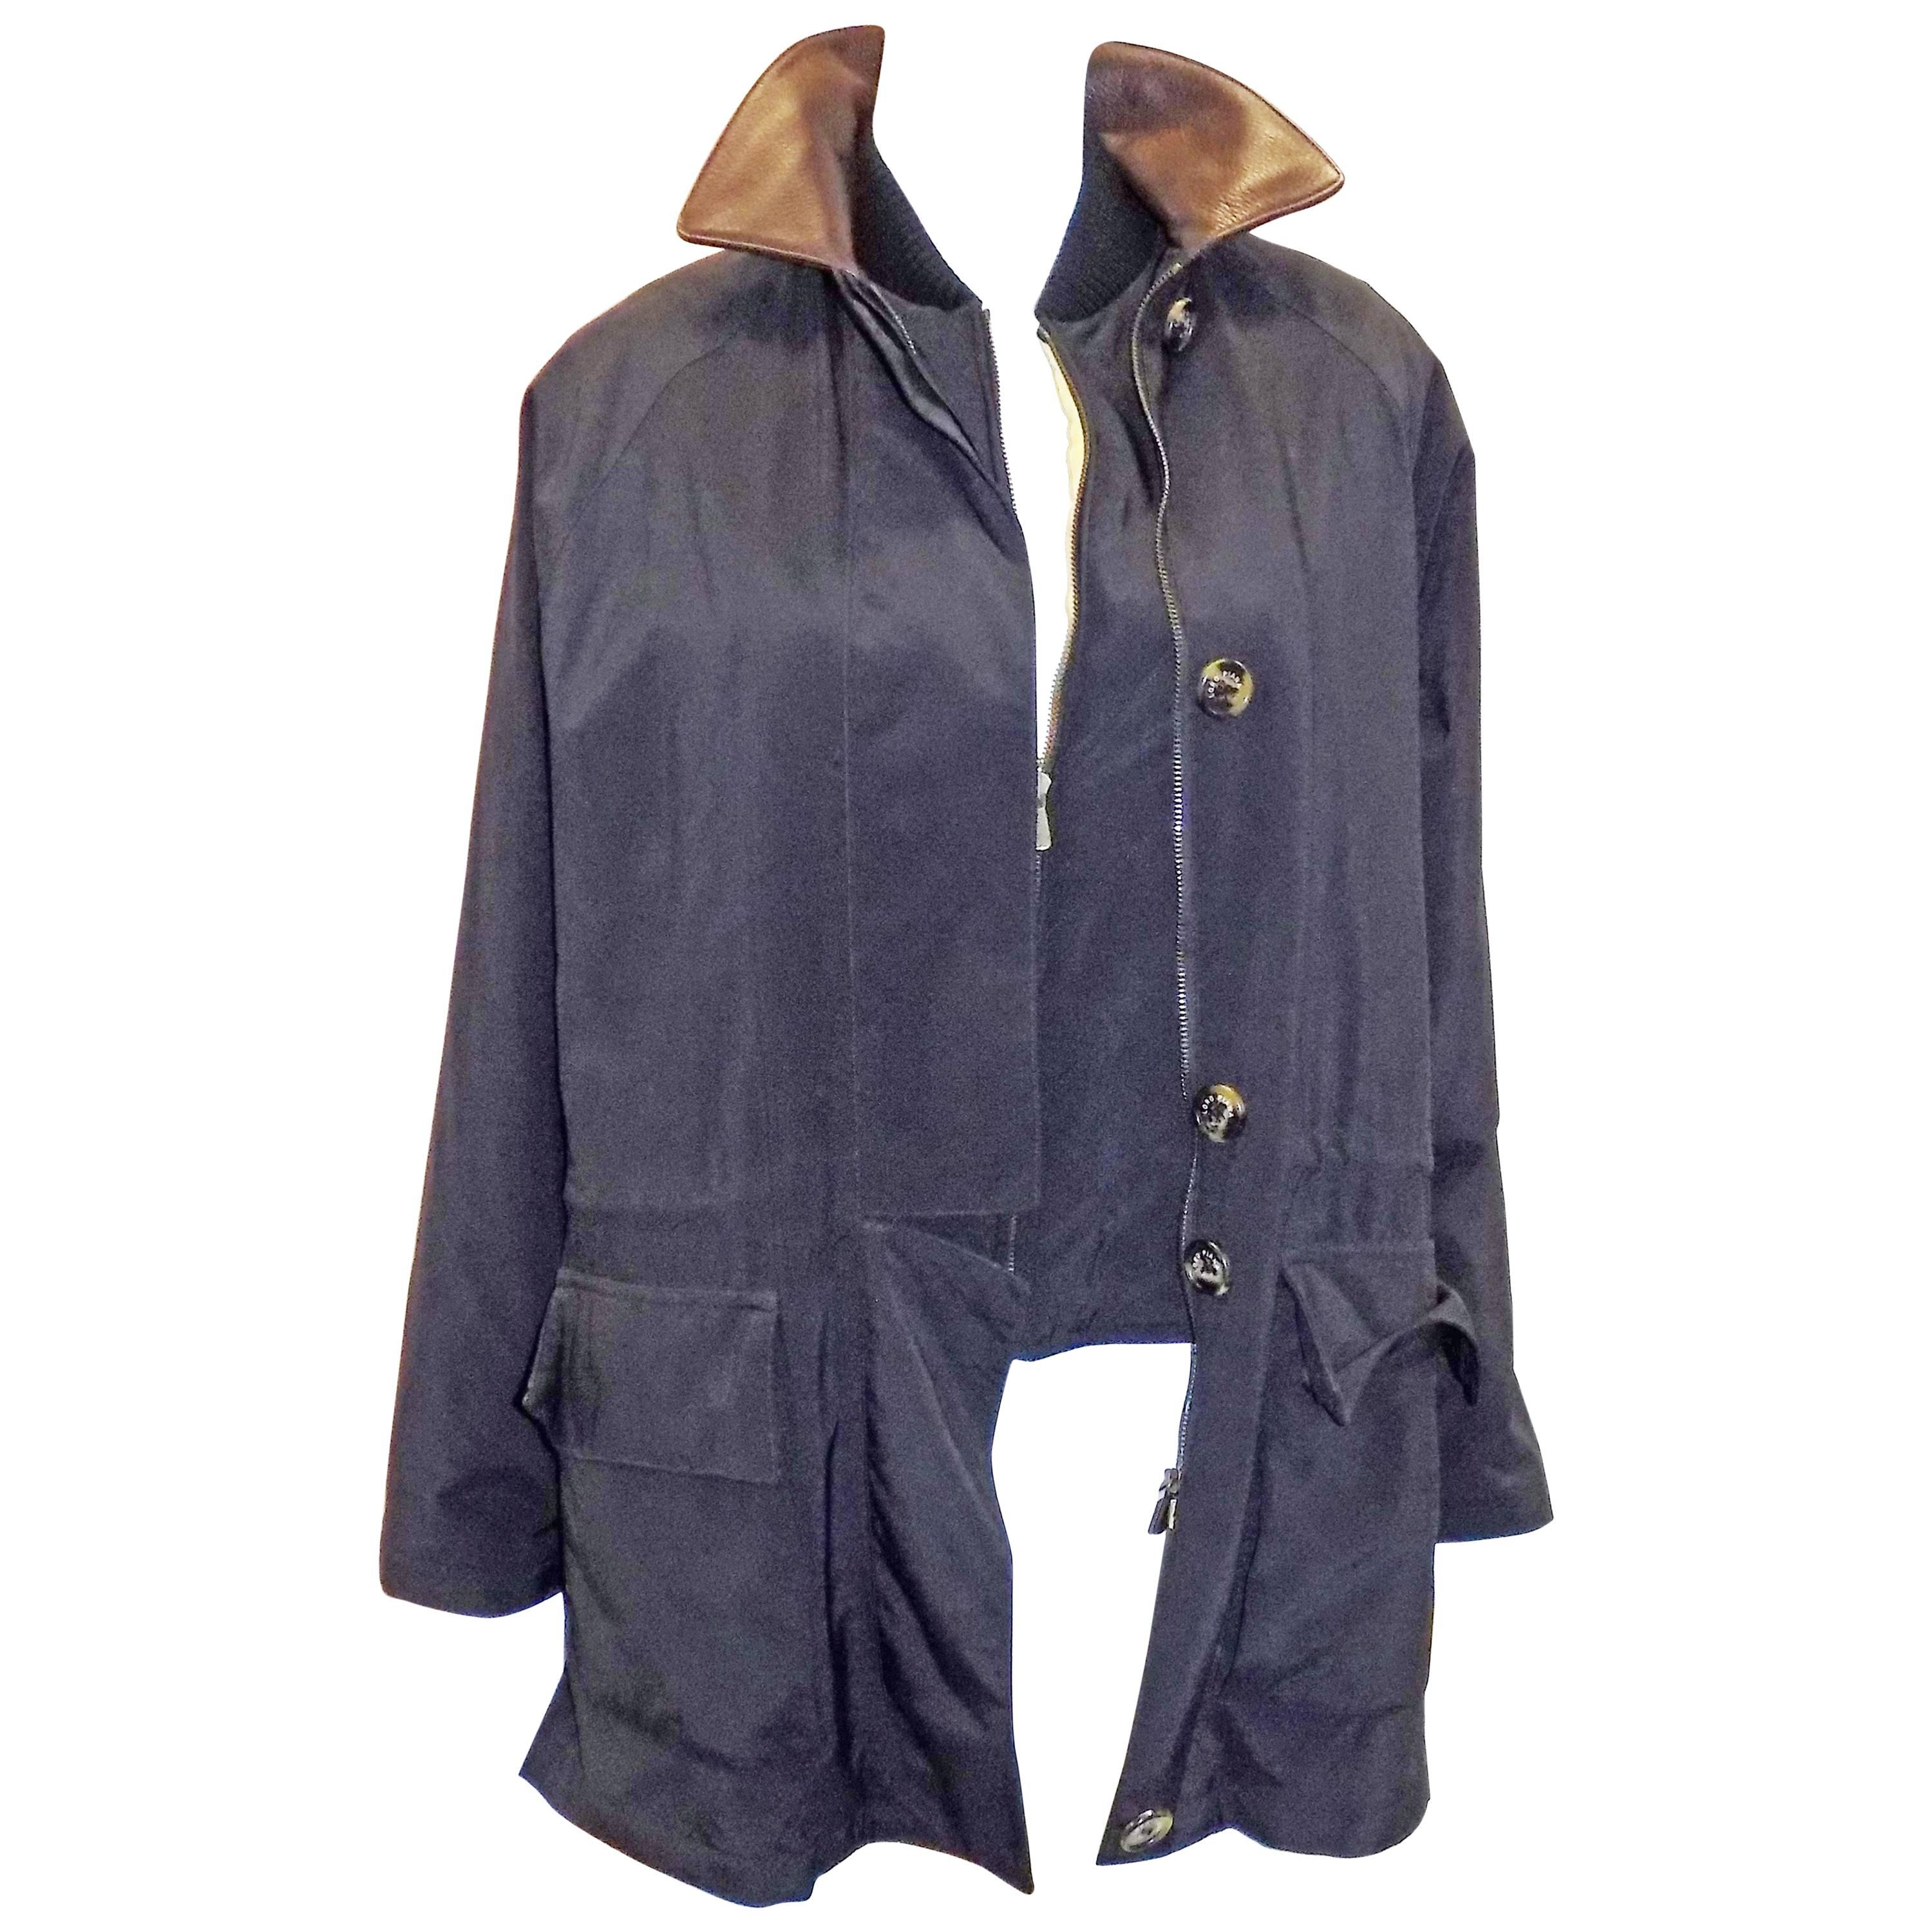 Loro Piana storm Jacket and Vest for Italian Equestrian team Olympics 1992 For Sale